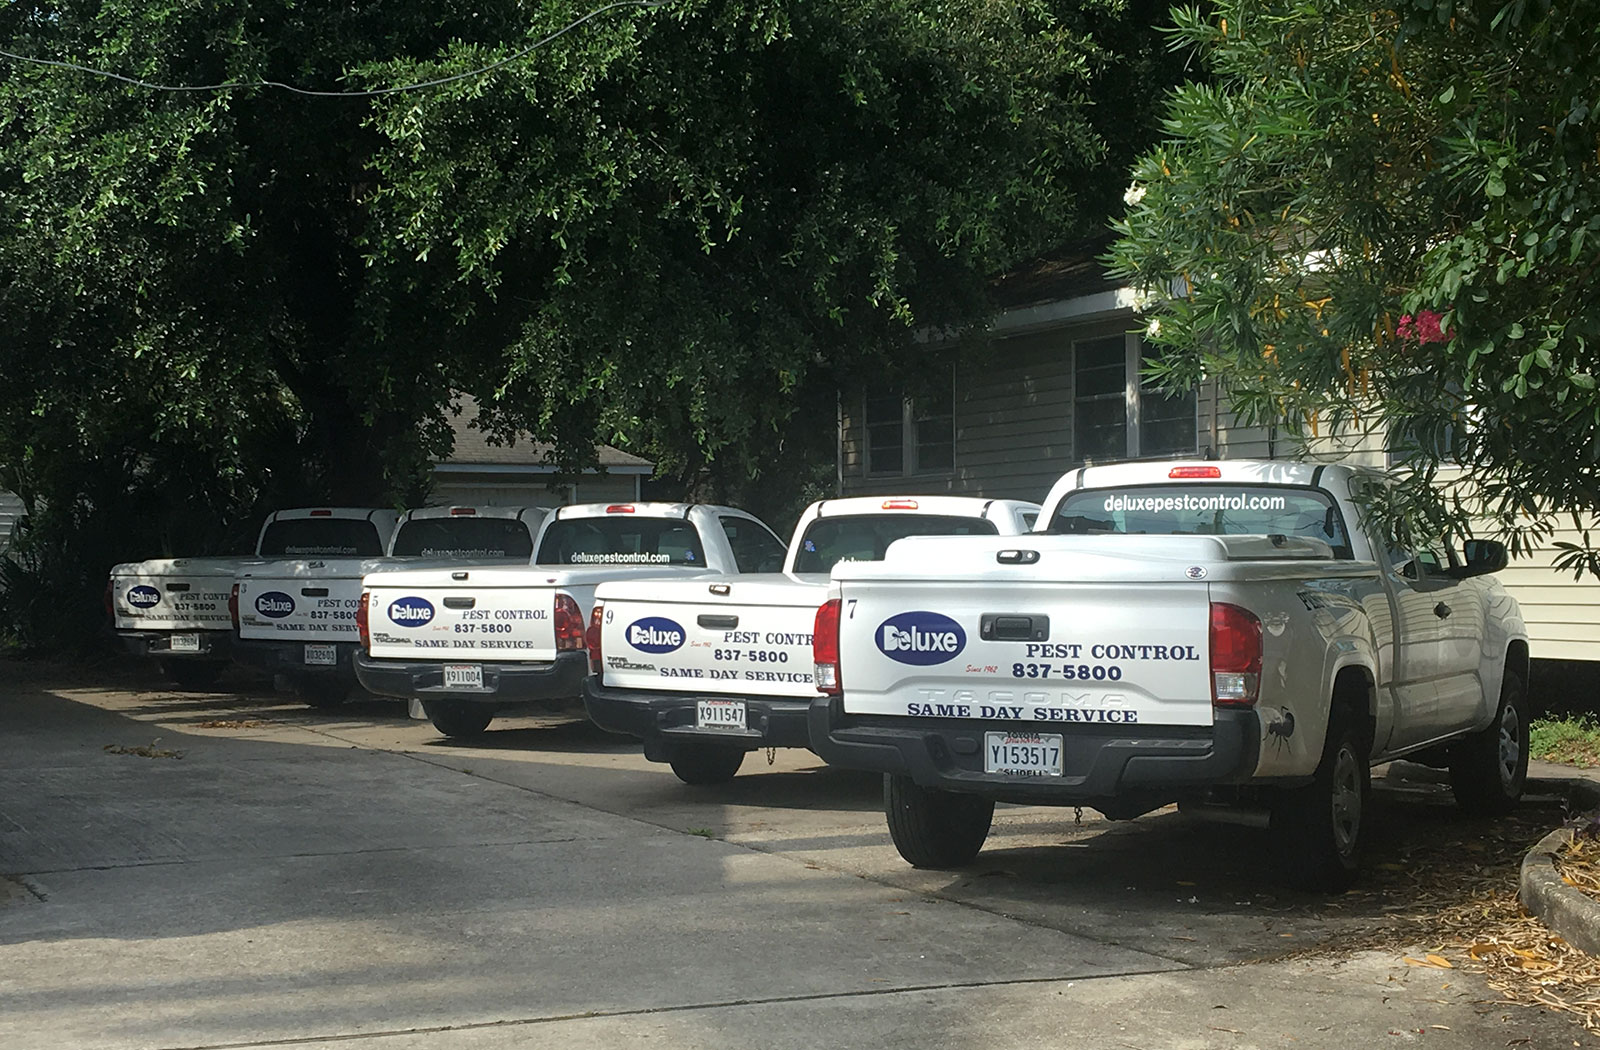 Deluxe Pest Control has a fleet of service trucks to serbve the Metro New Orleans area